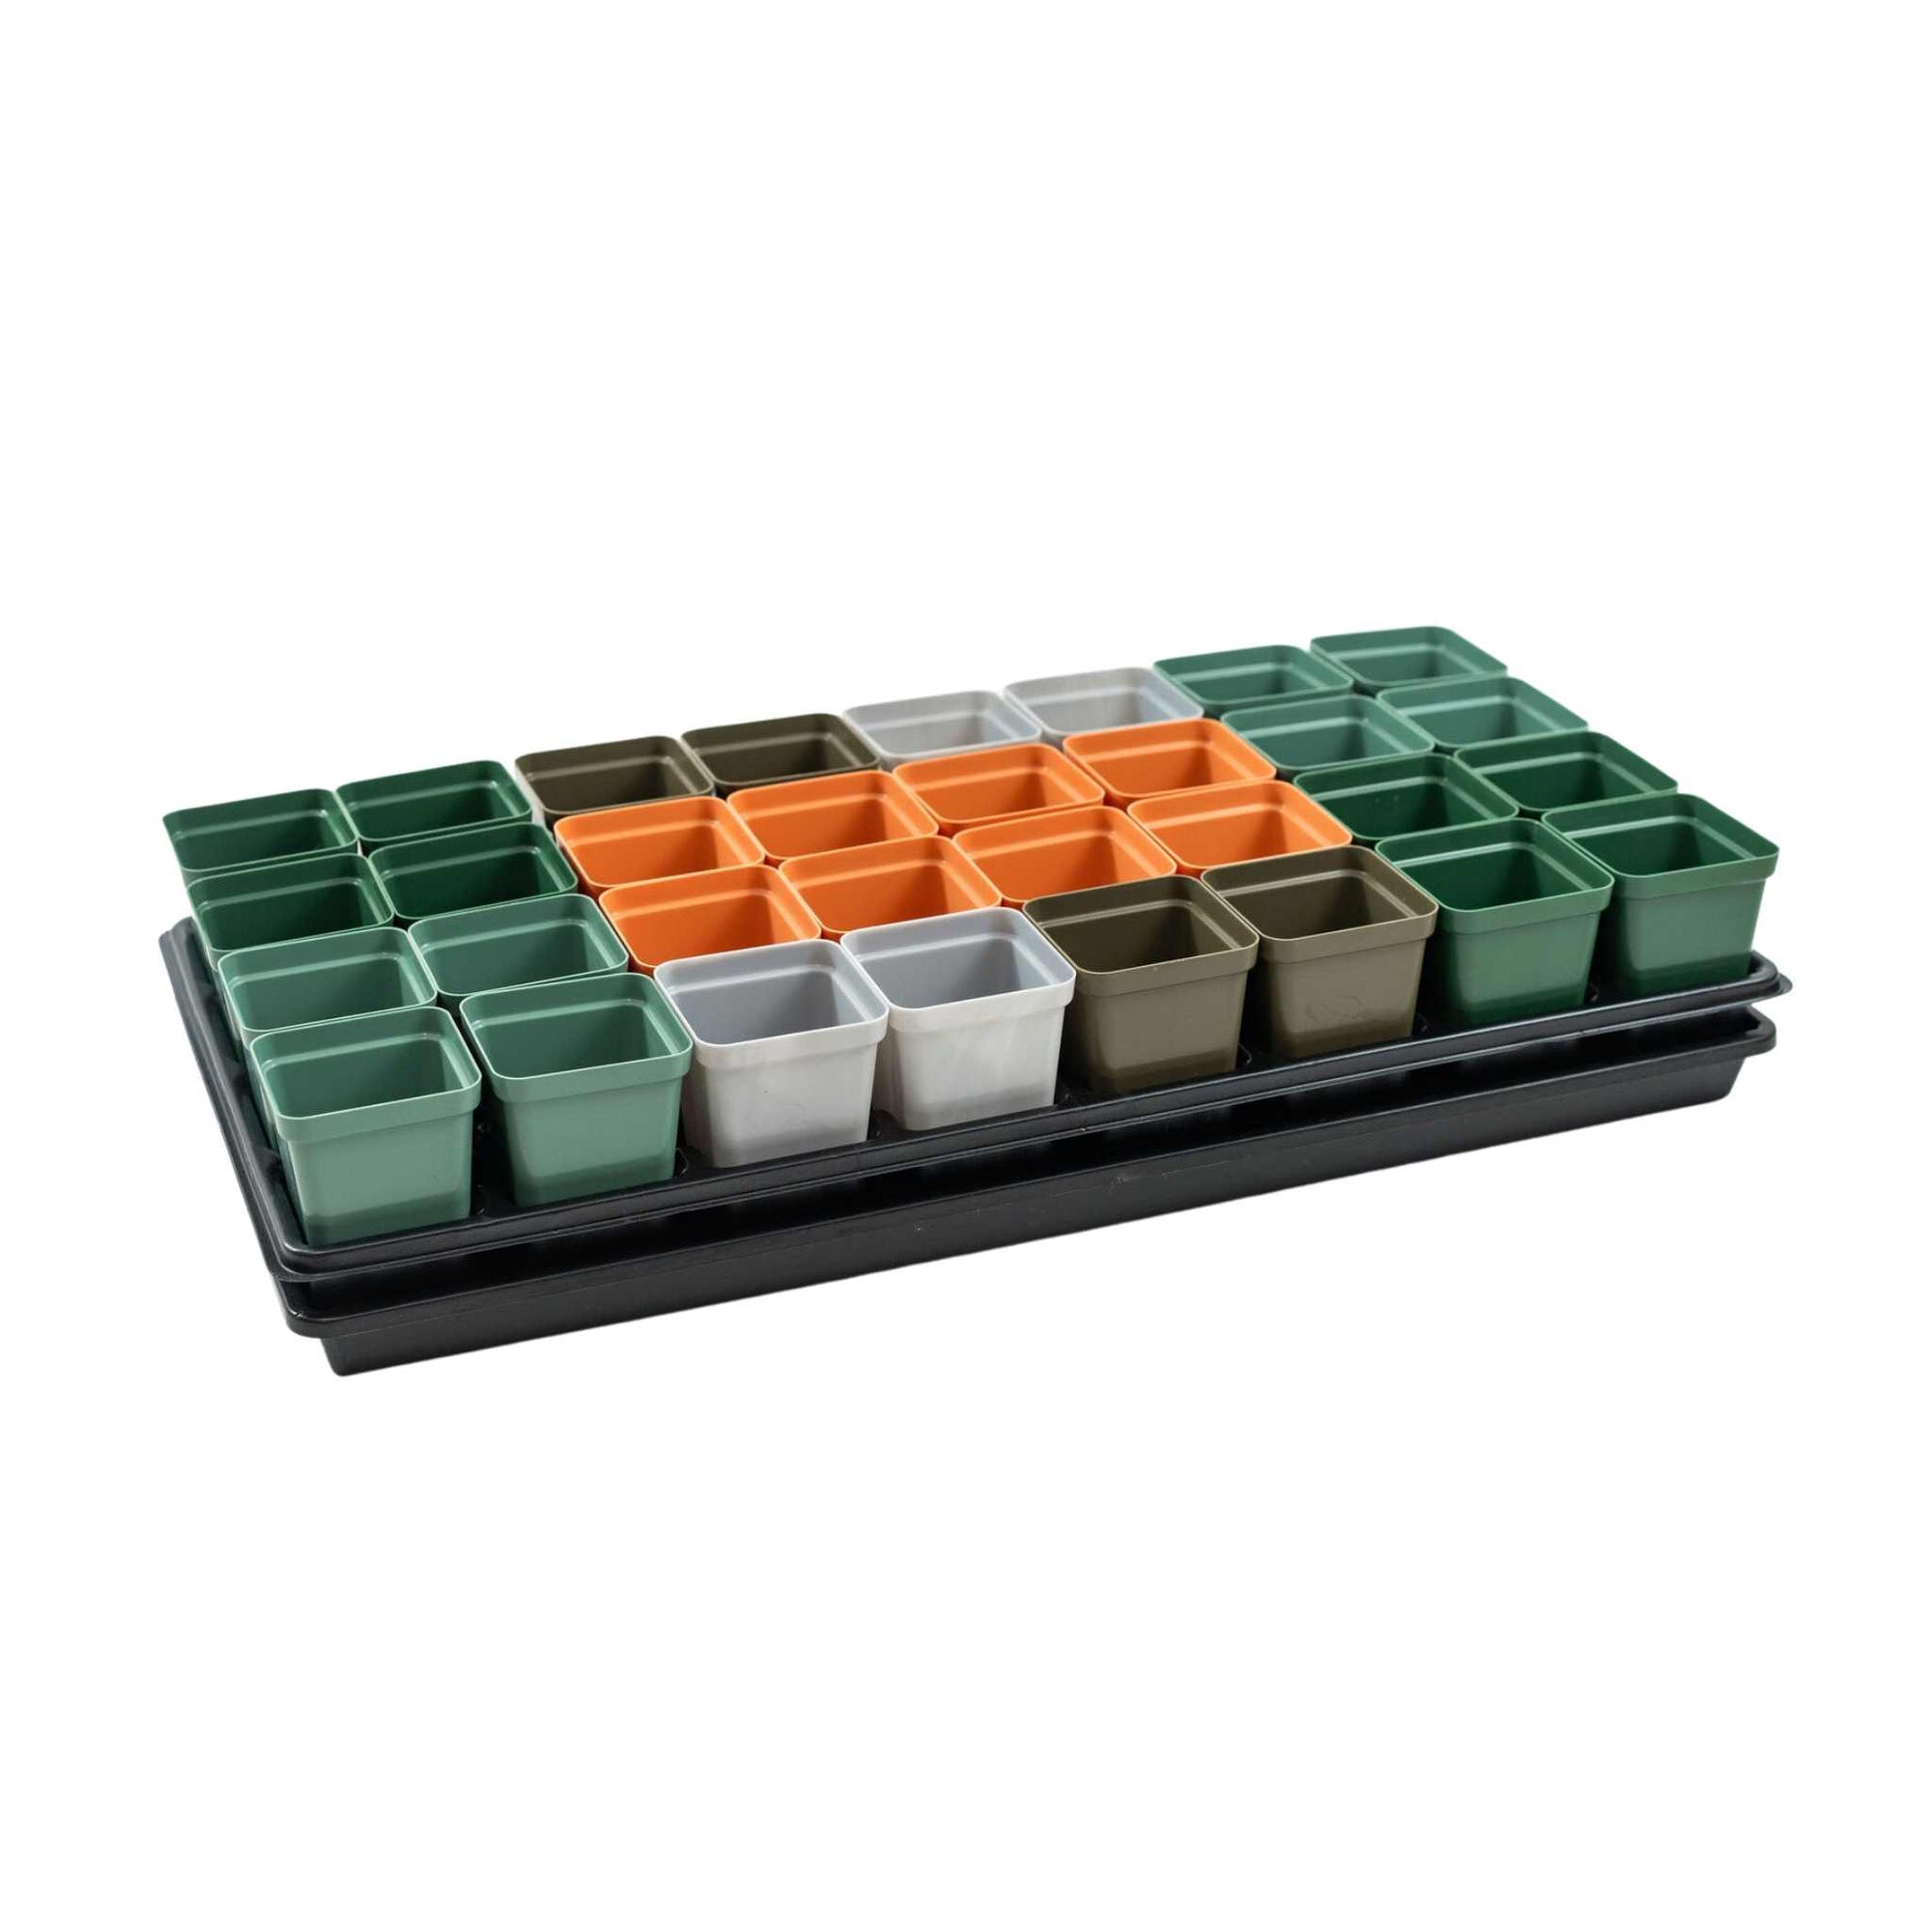 2.5" Seed Starting Cups with 32 Cell Insert and Shallow 1020 Tray in black